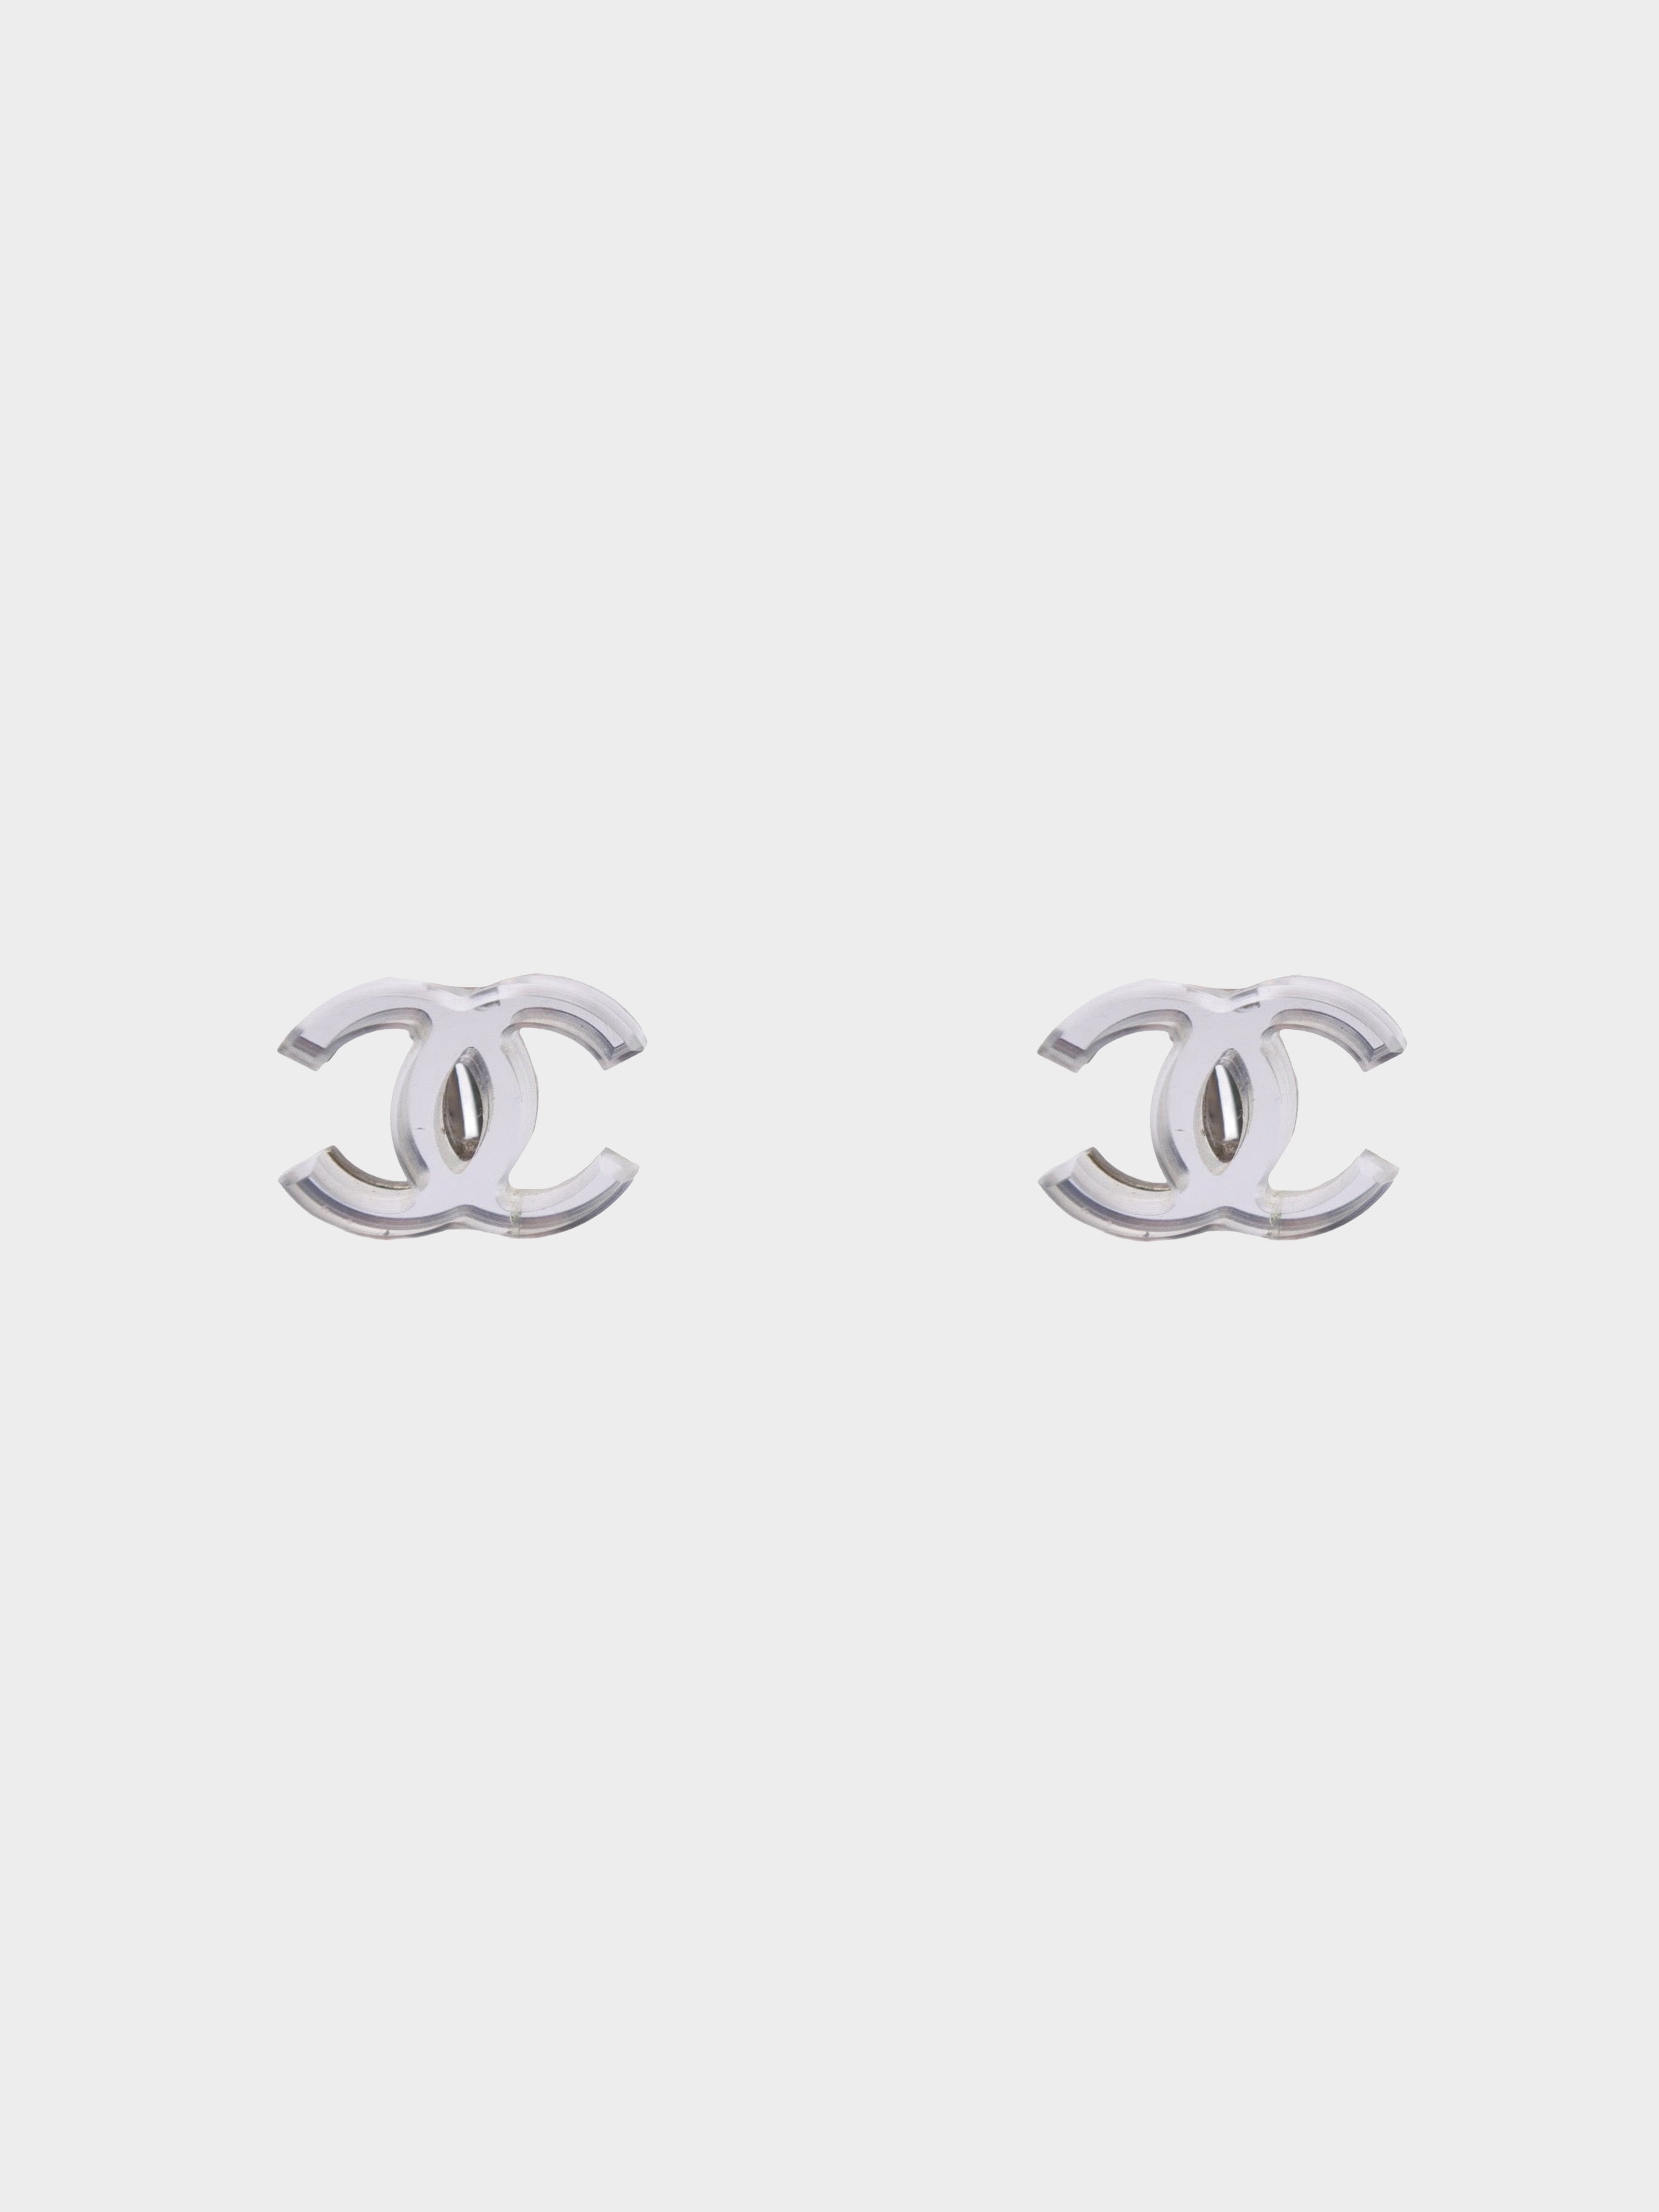 https://cdn.shopify.com/s/files/1/0592/8750/3020/products/ChanelCruiseClearEarrings.jpg?v=1679932944&width=3024&height=4032